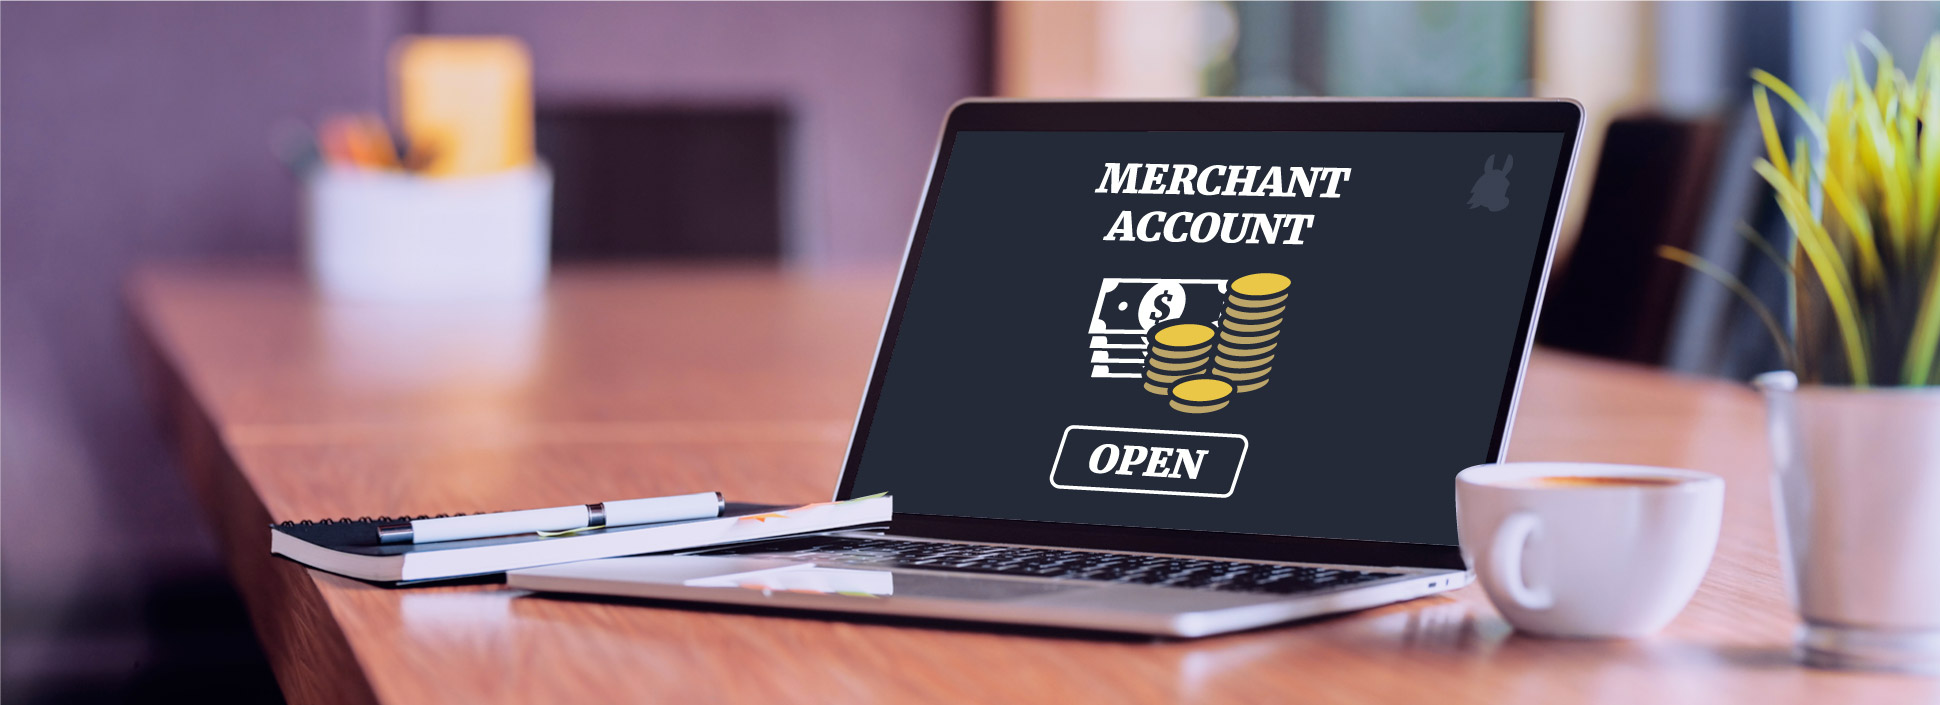 Opening a Merchant Account for online business